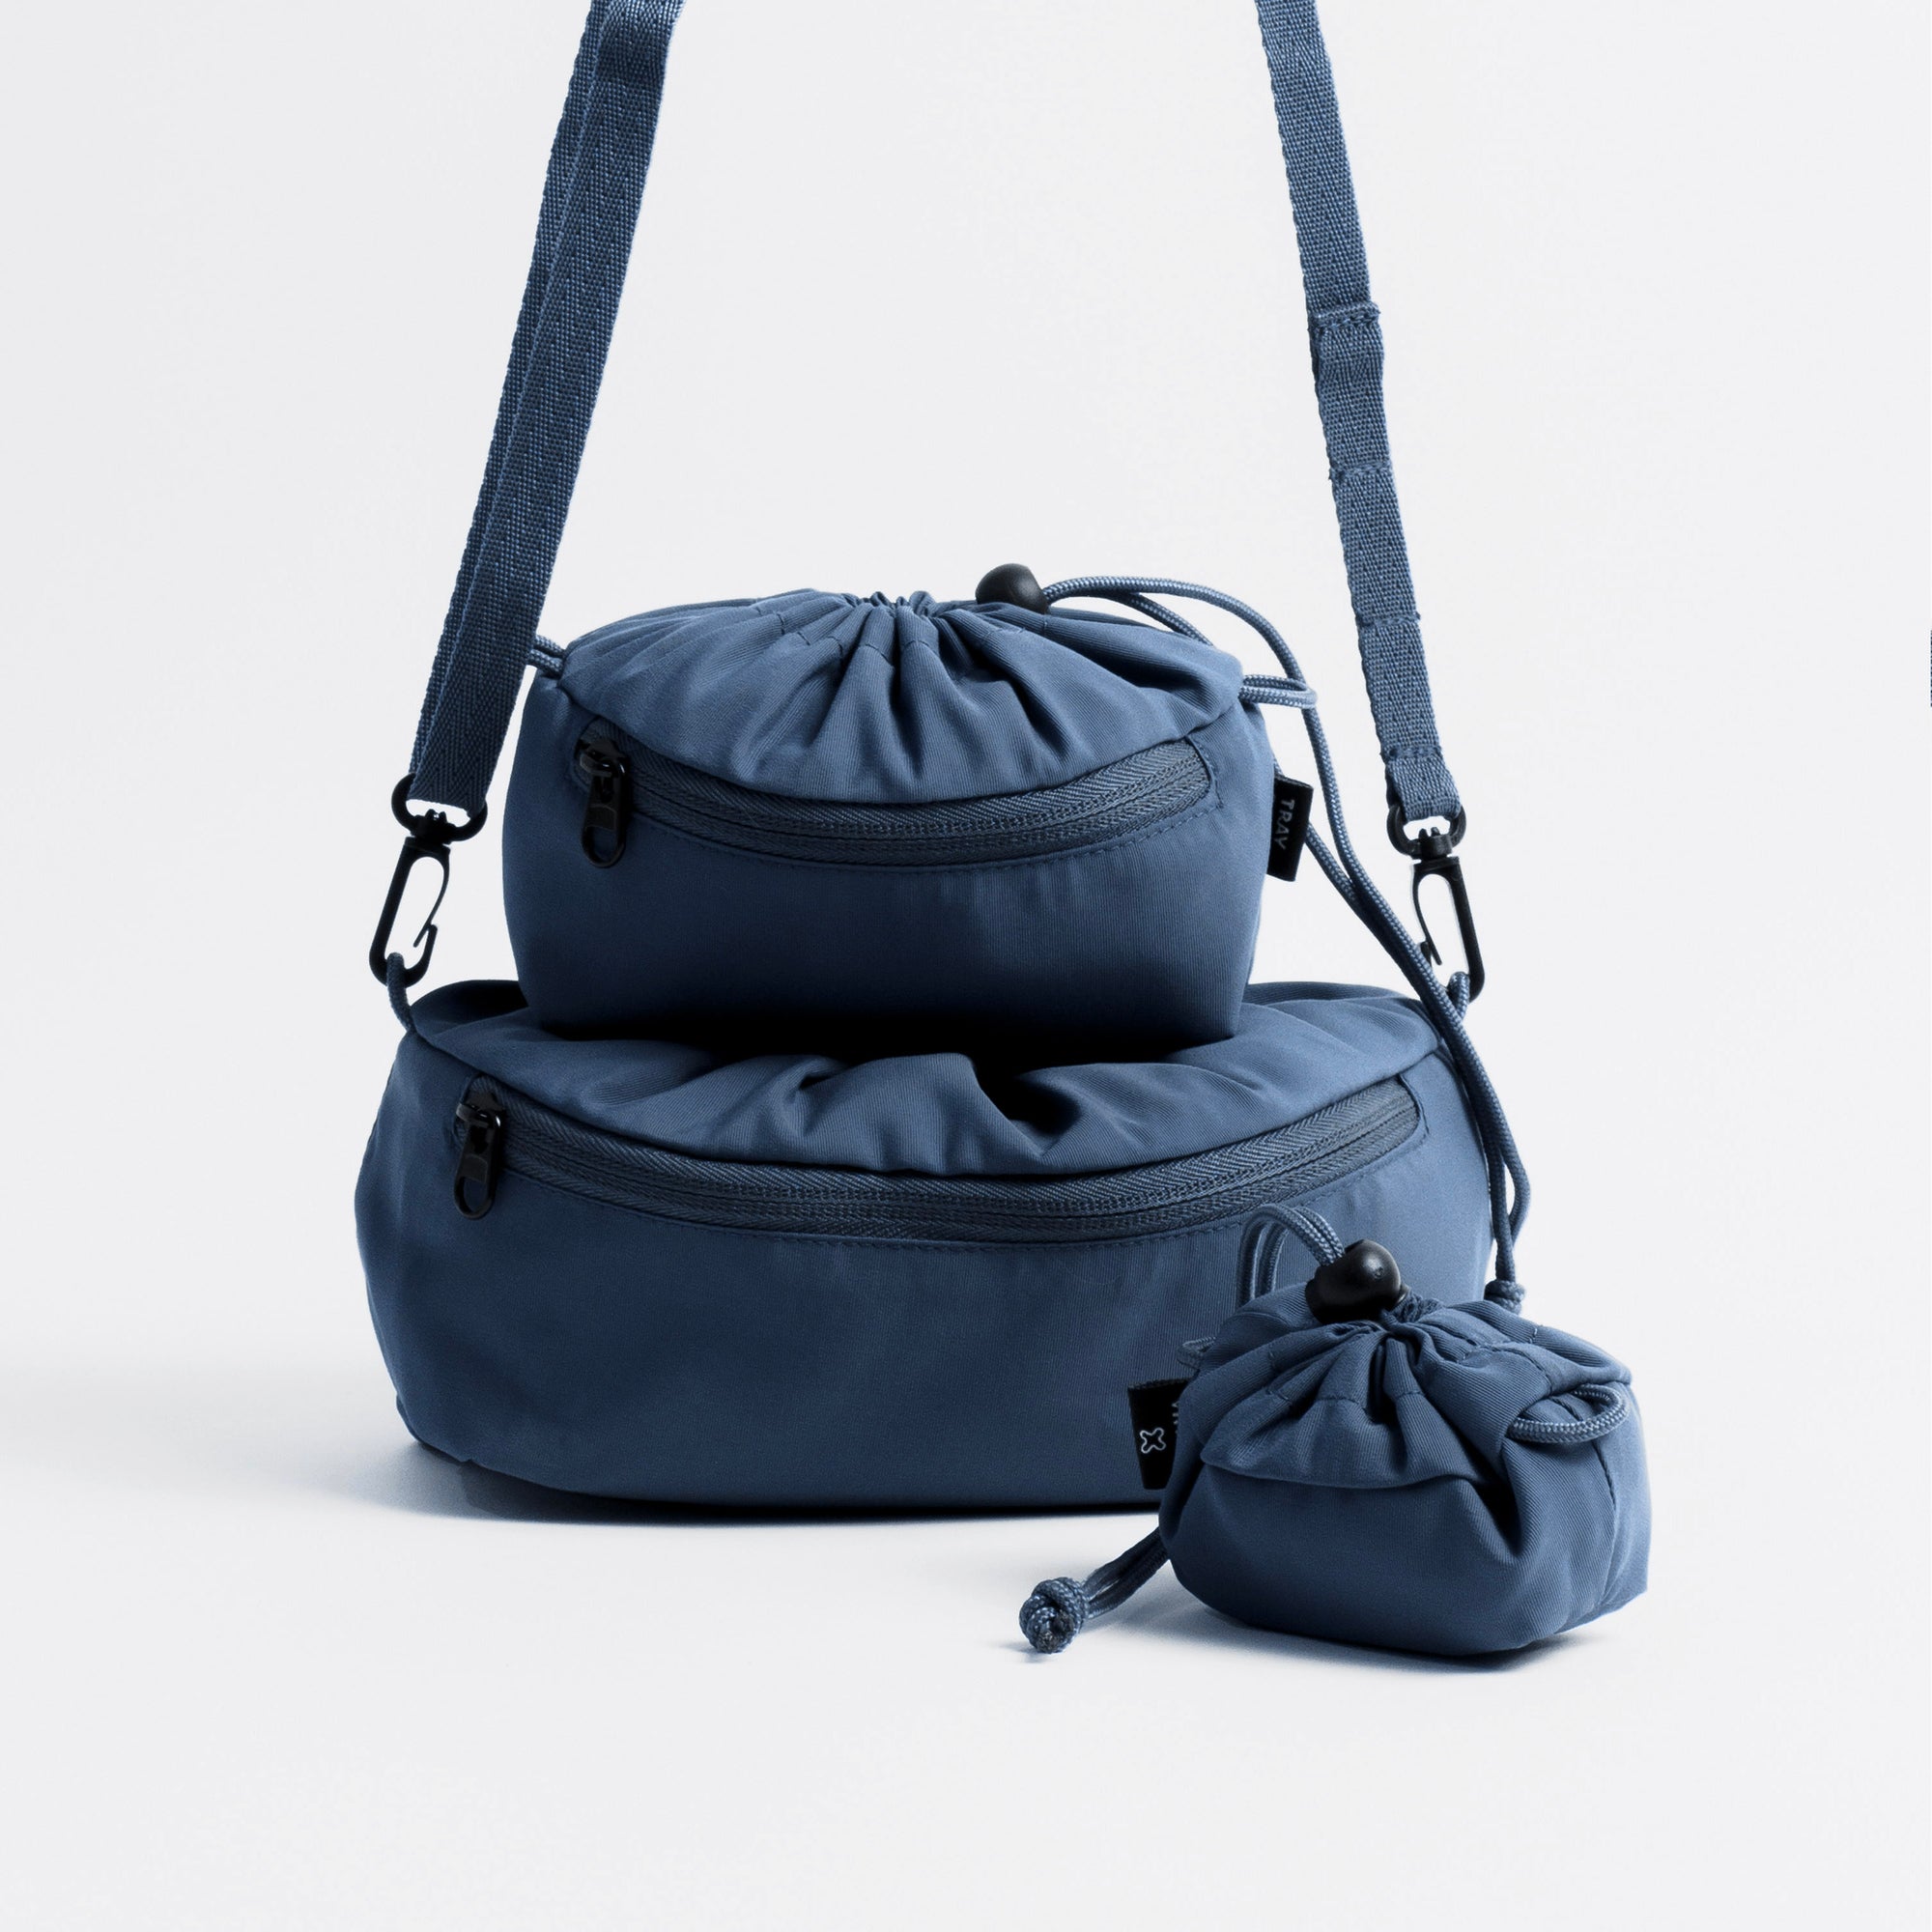 TPS (Tray-Pouch-Sling)